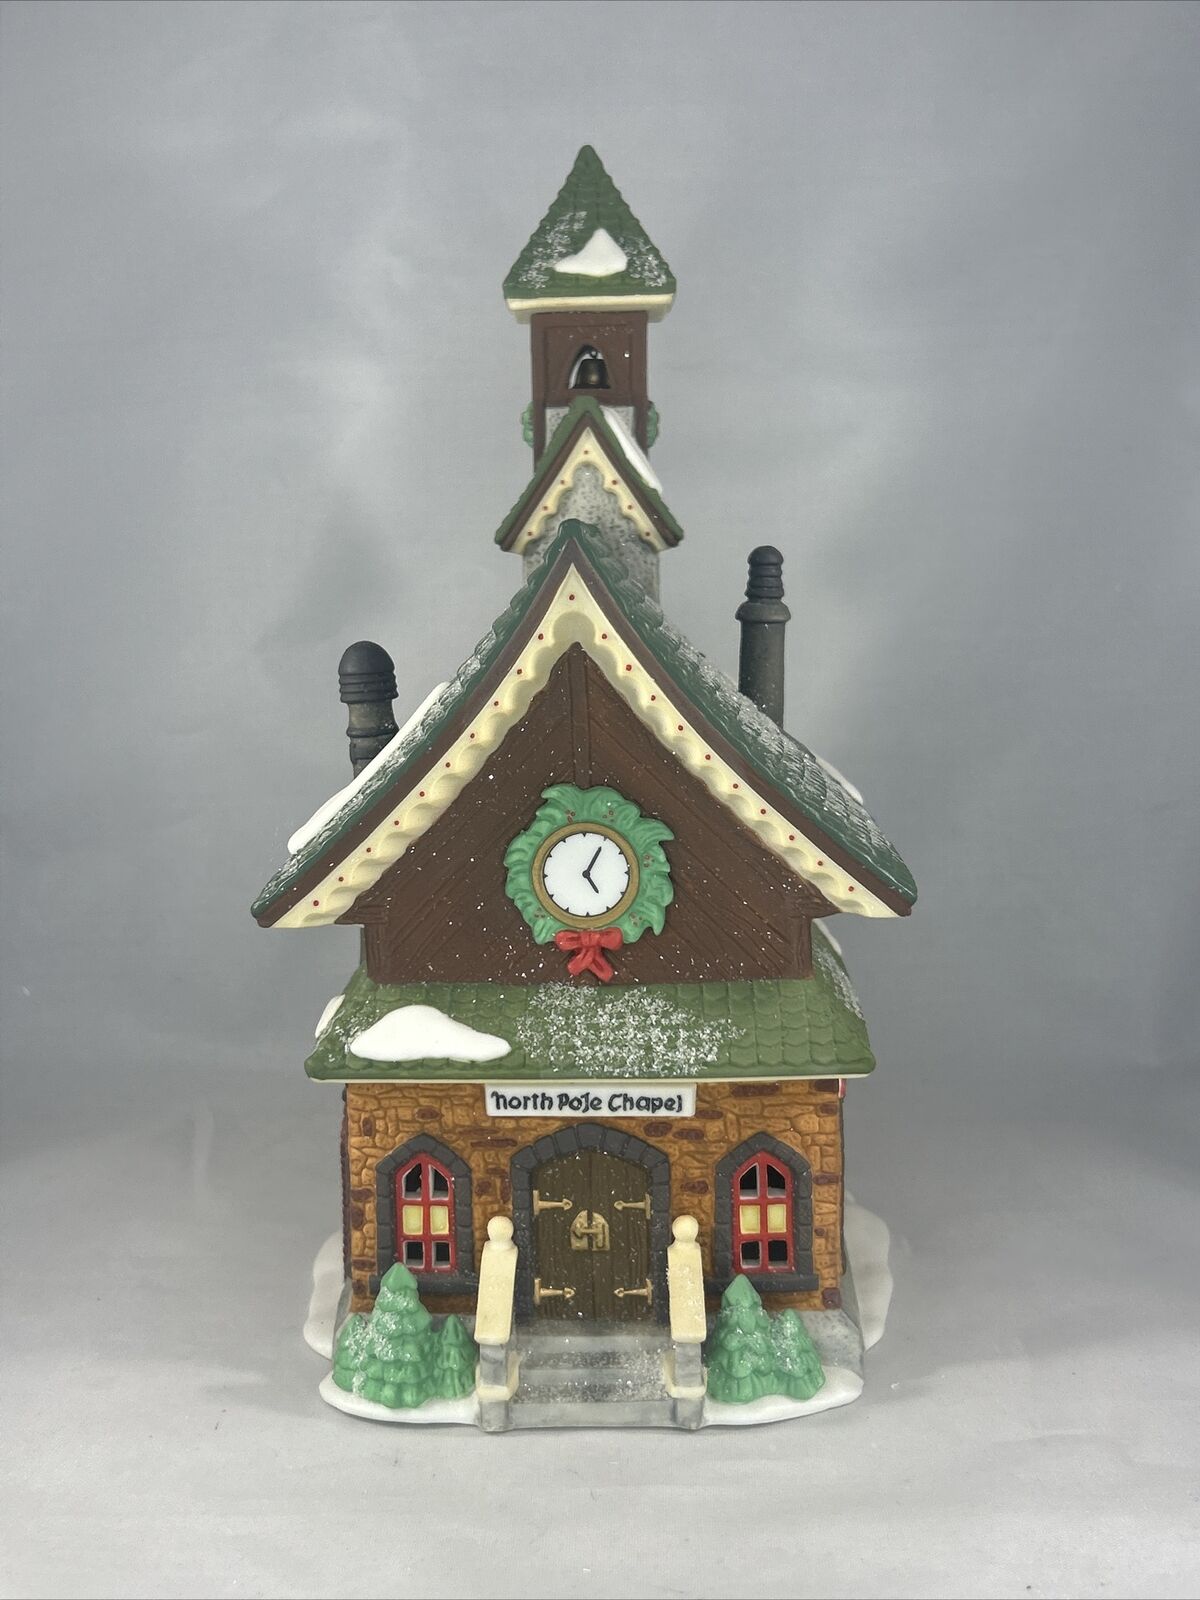 DEPARTMENT 56 HERITAGE VILLAGE NORTH POLE SERIES CHAPEL IN BOX #5626 No Light